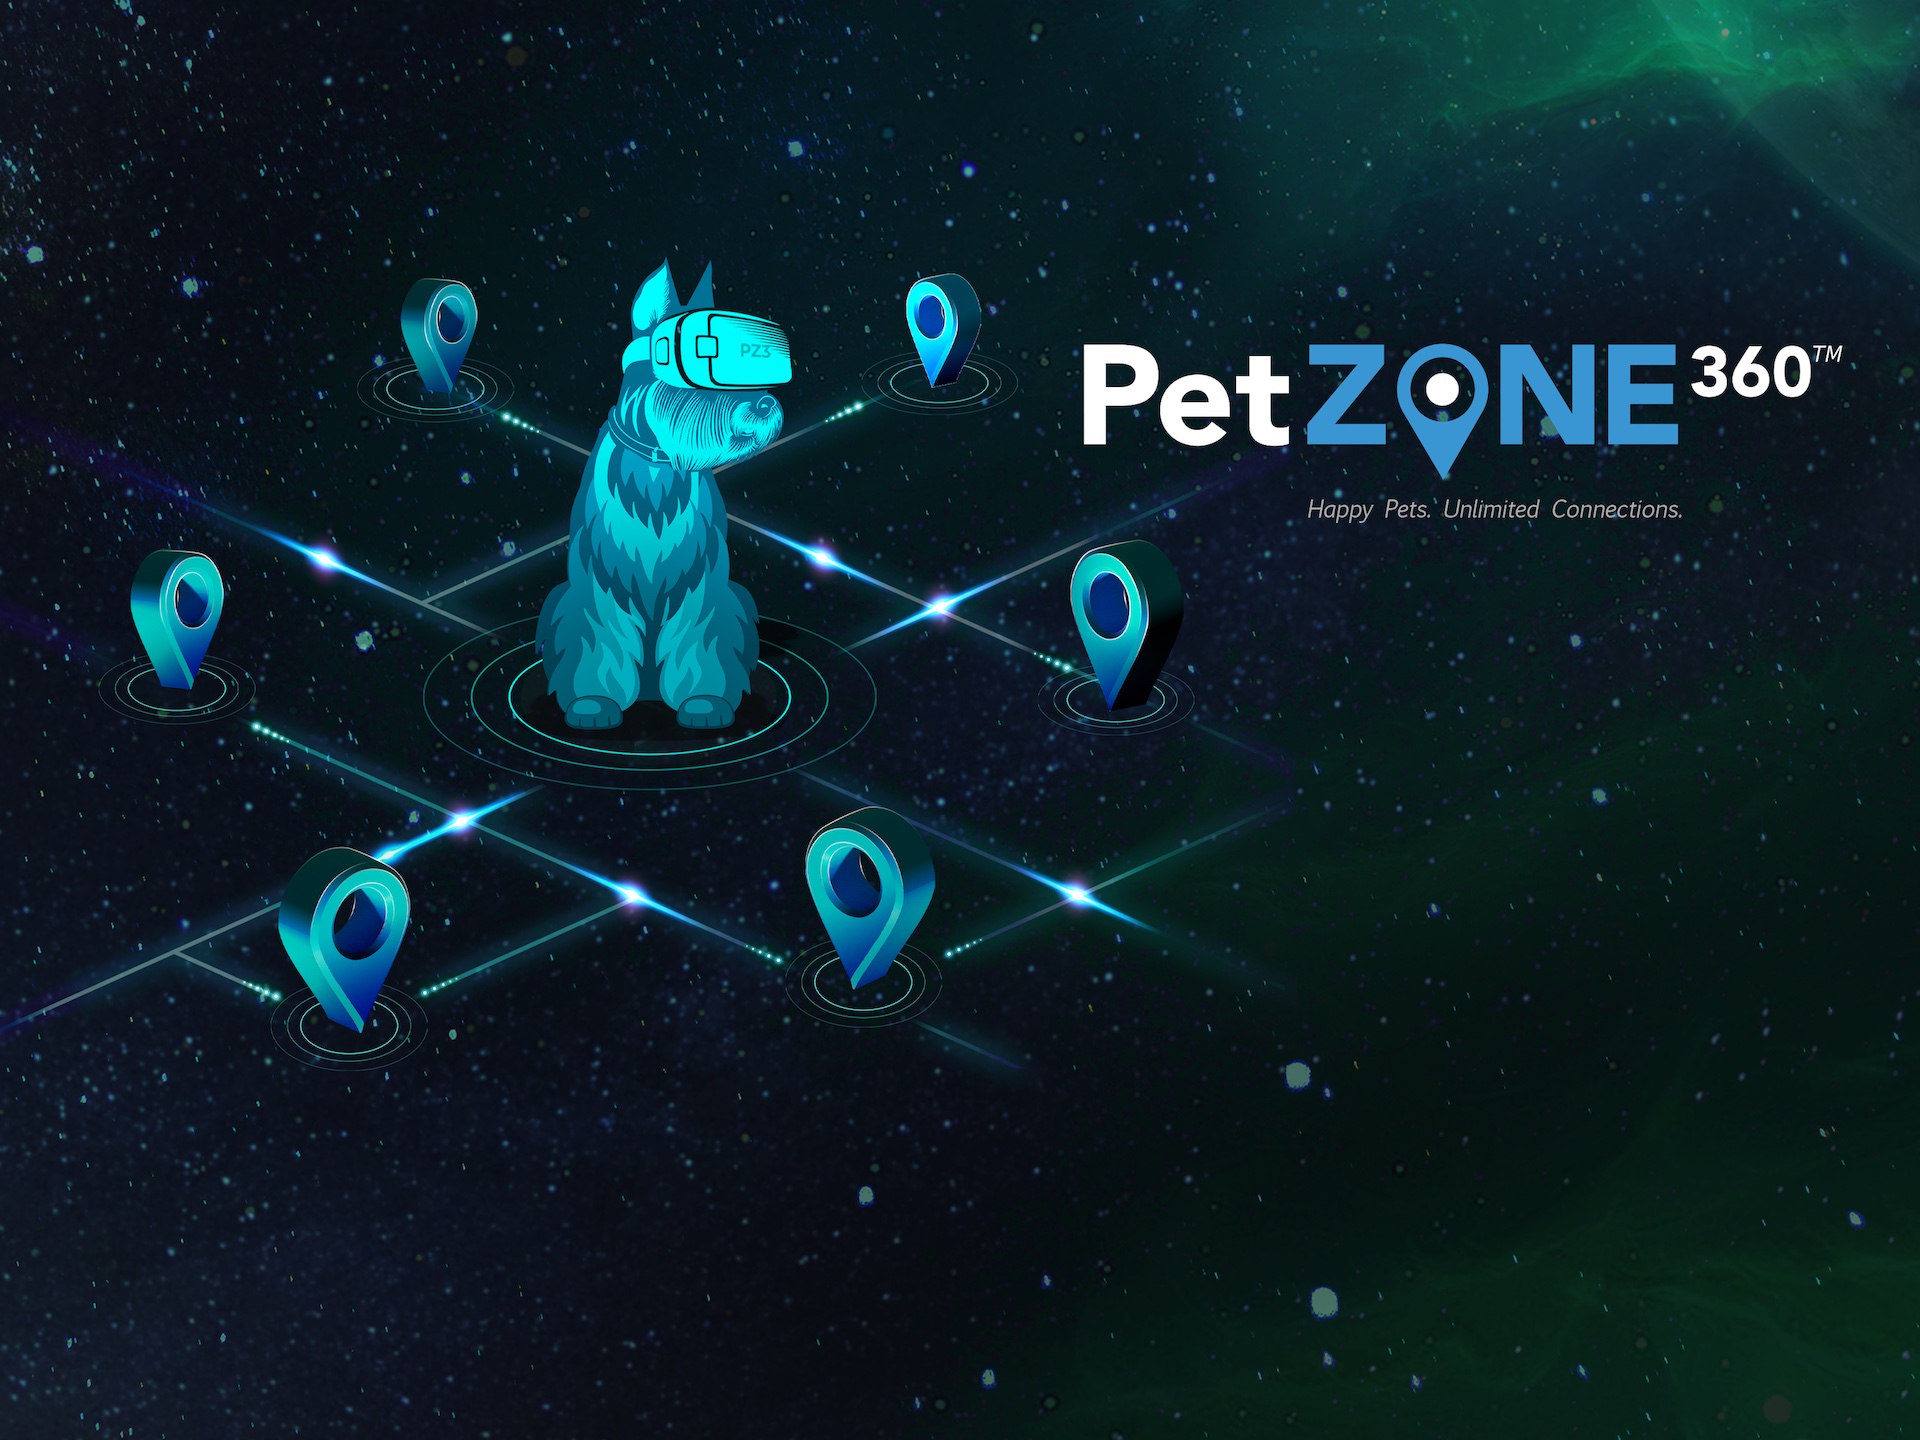 Video Player Background with PetZONE360 Branding